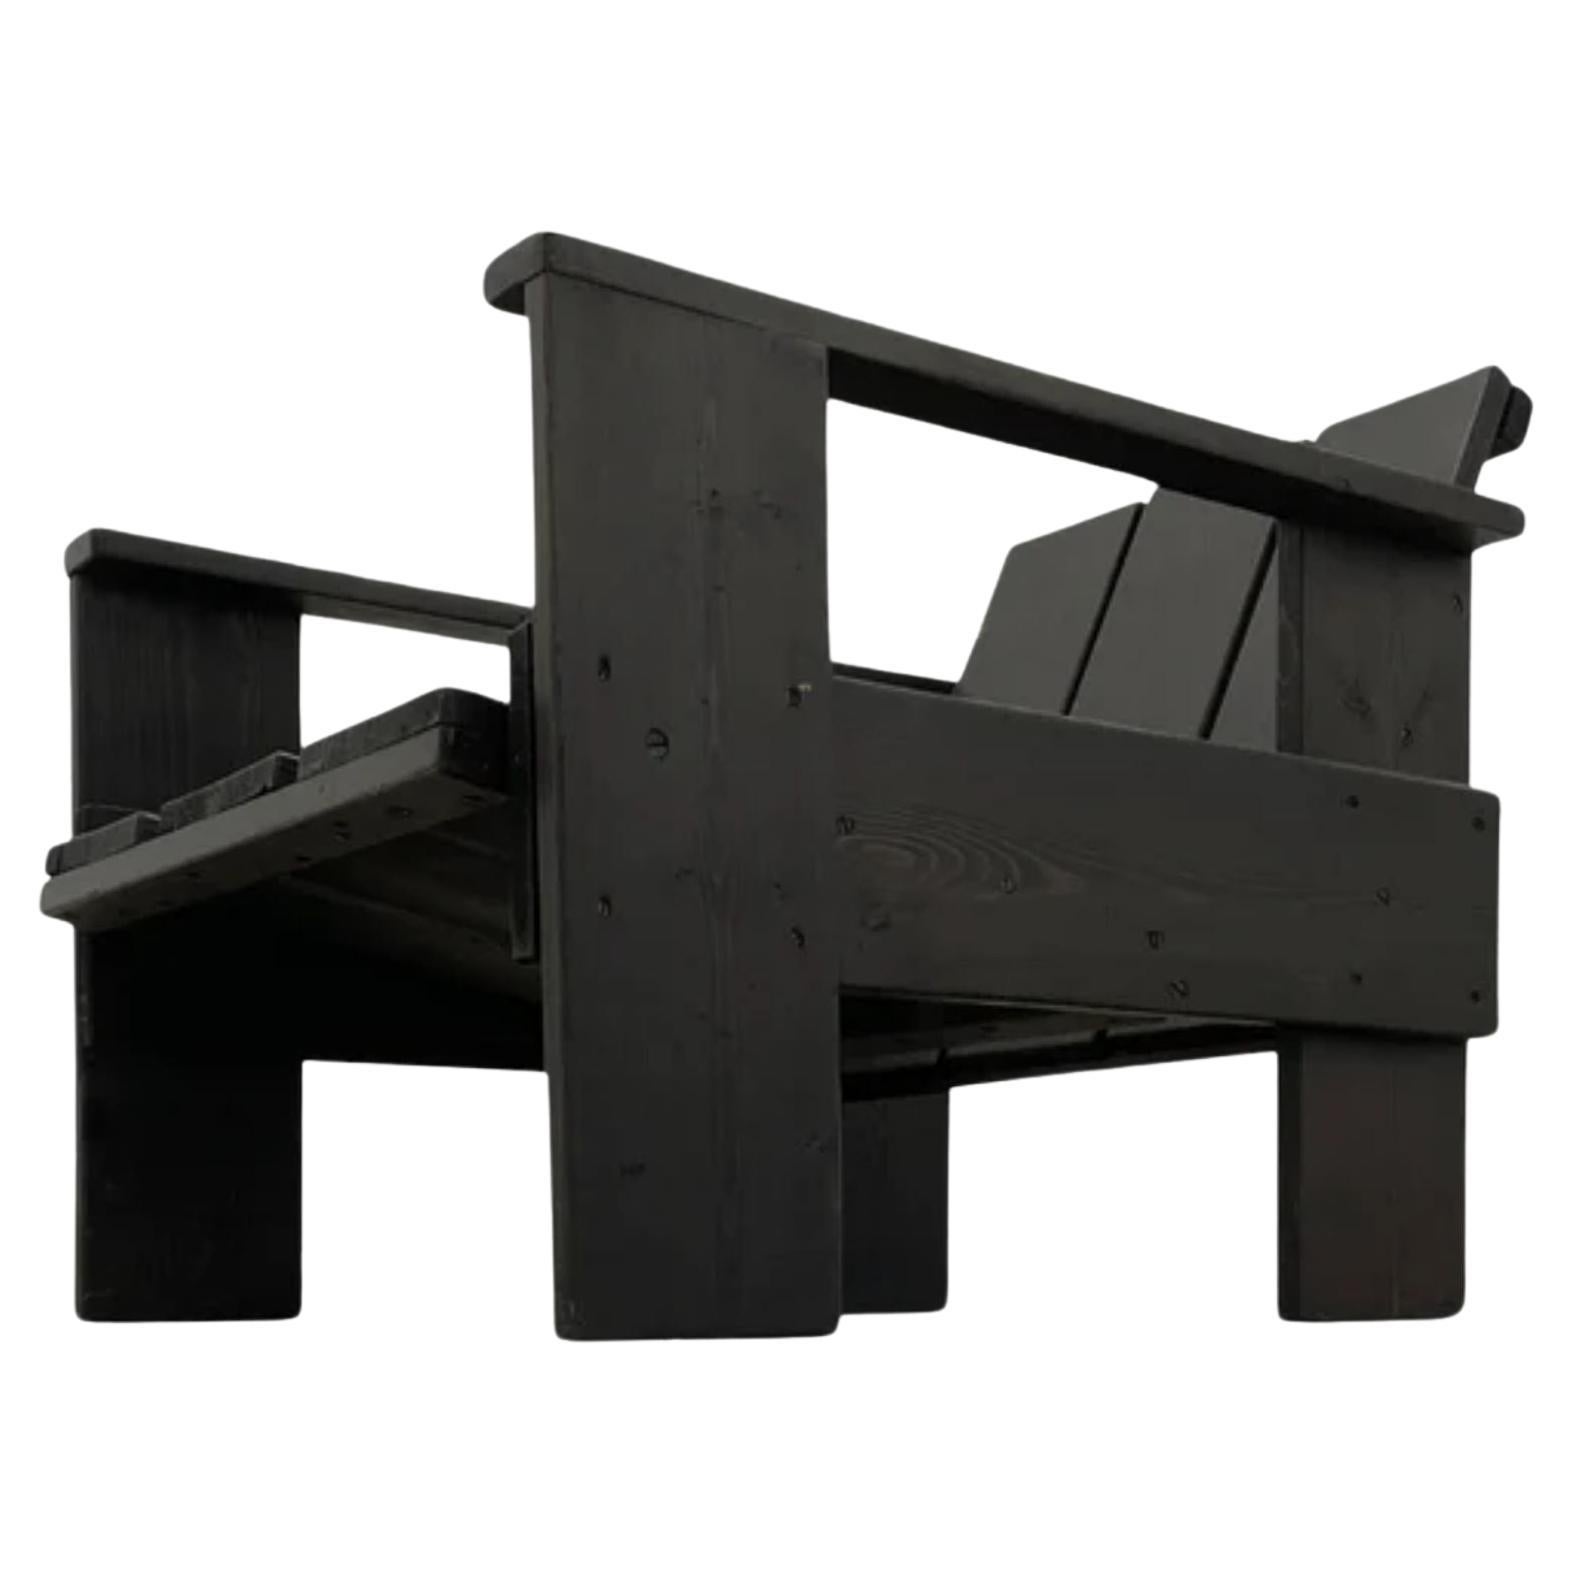 "Crate" Lounge Chair in Deal by Gerrit Rietveld, circa 1934 For Sale